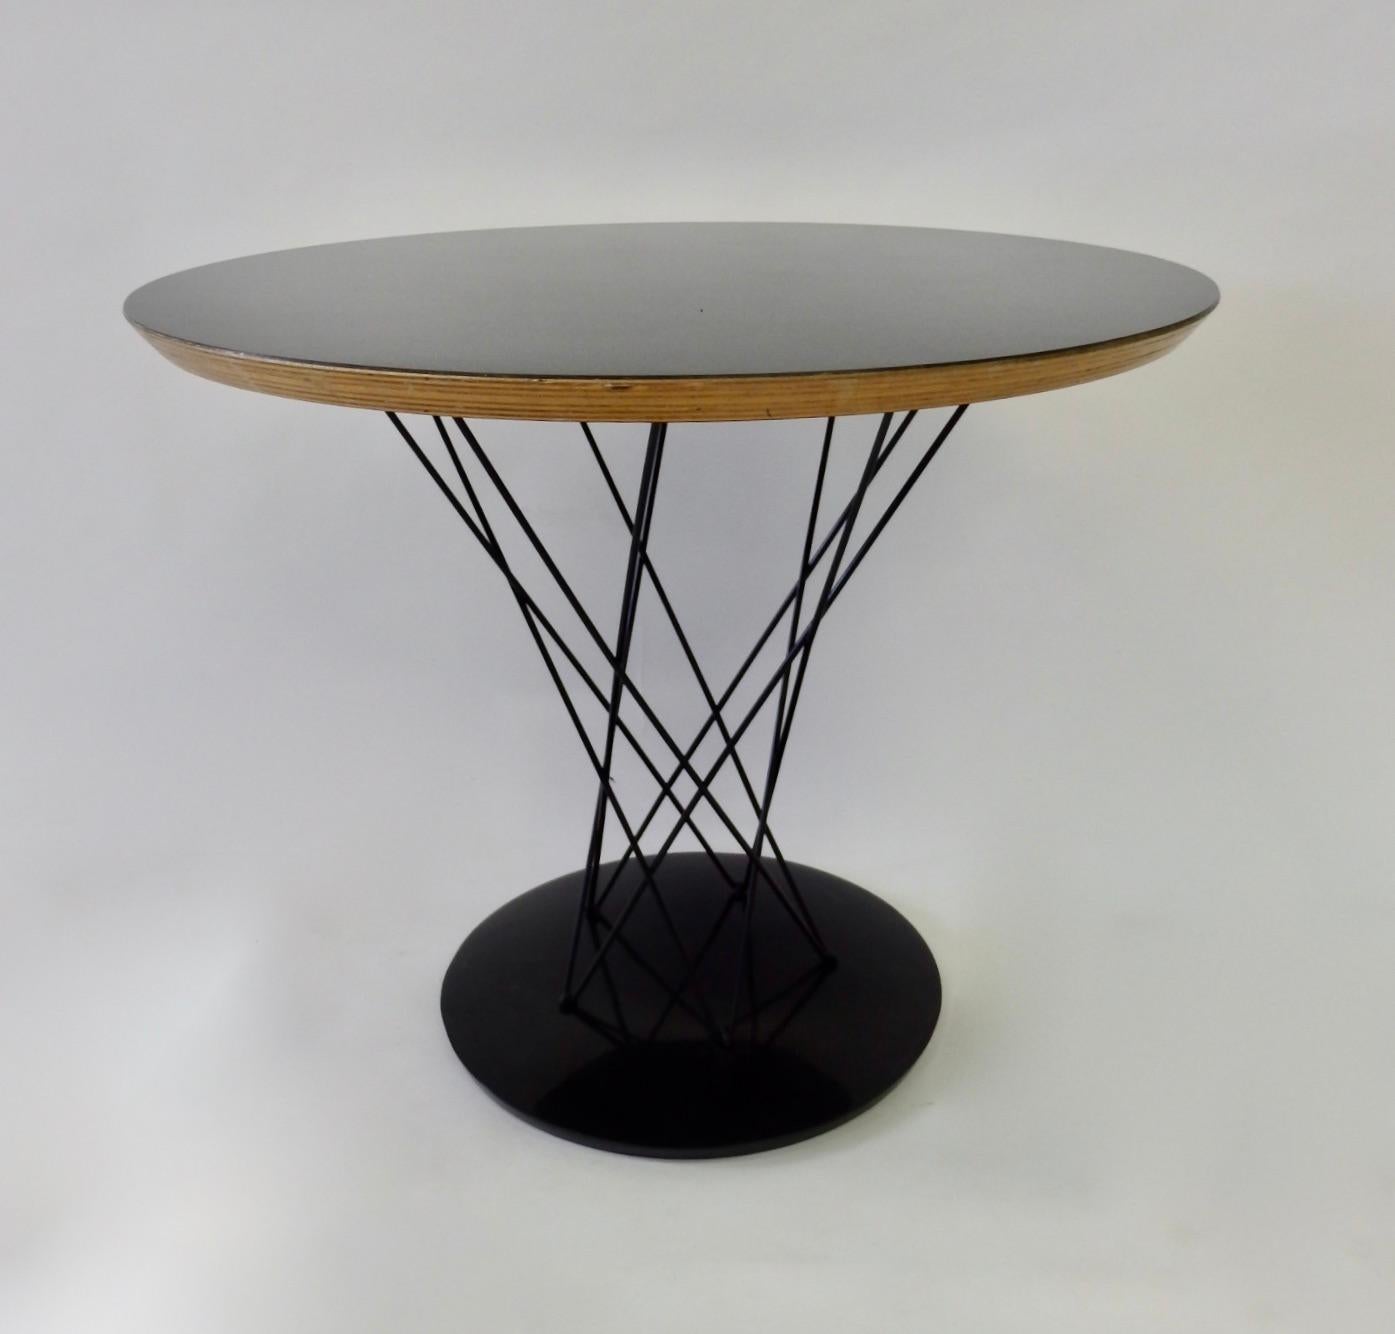 Cyclone occasional table designed by Isamu Noguchi for Knoll. Round cast iron base holds wire cyclone base supporting black laminate top. Partial Knoll label remains.